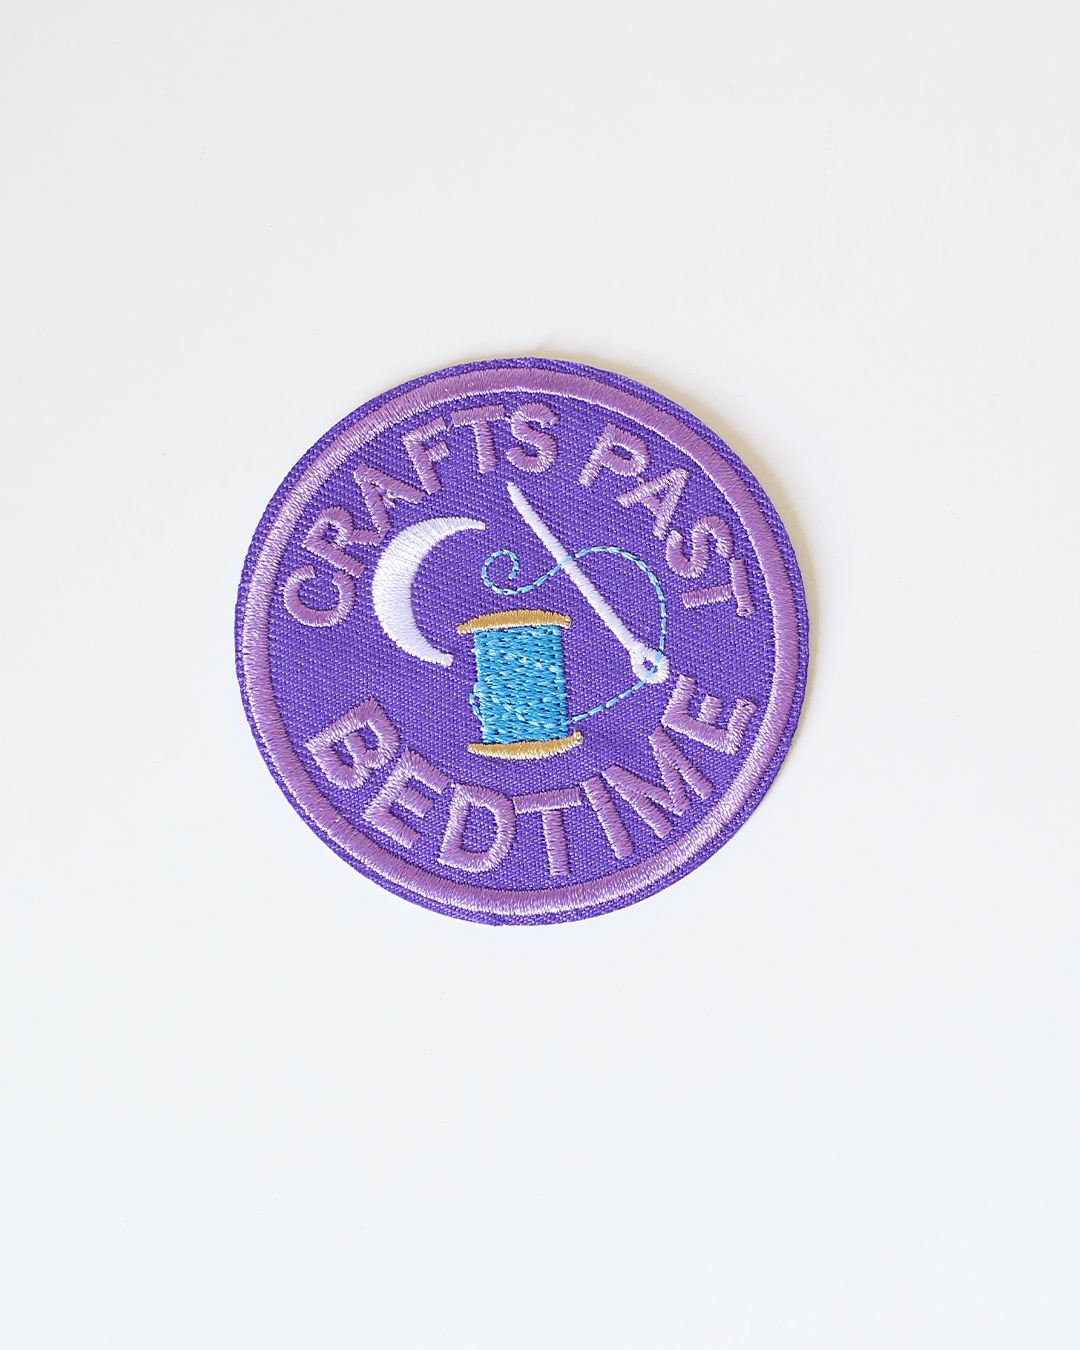 Crafts Past Bedtime Patch Embroidered Iron On Clothes Patch - Crafts Past Bedtime Patch